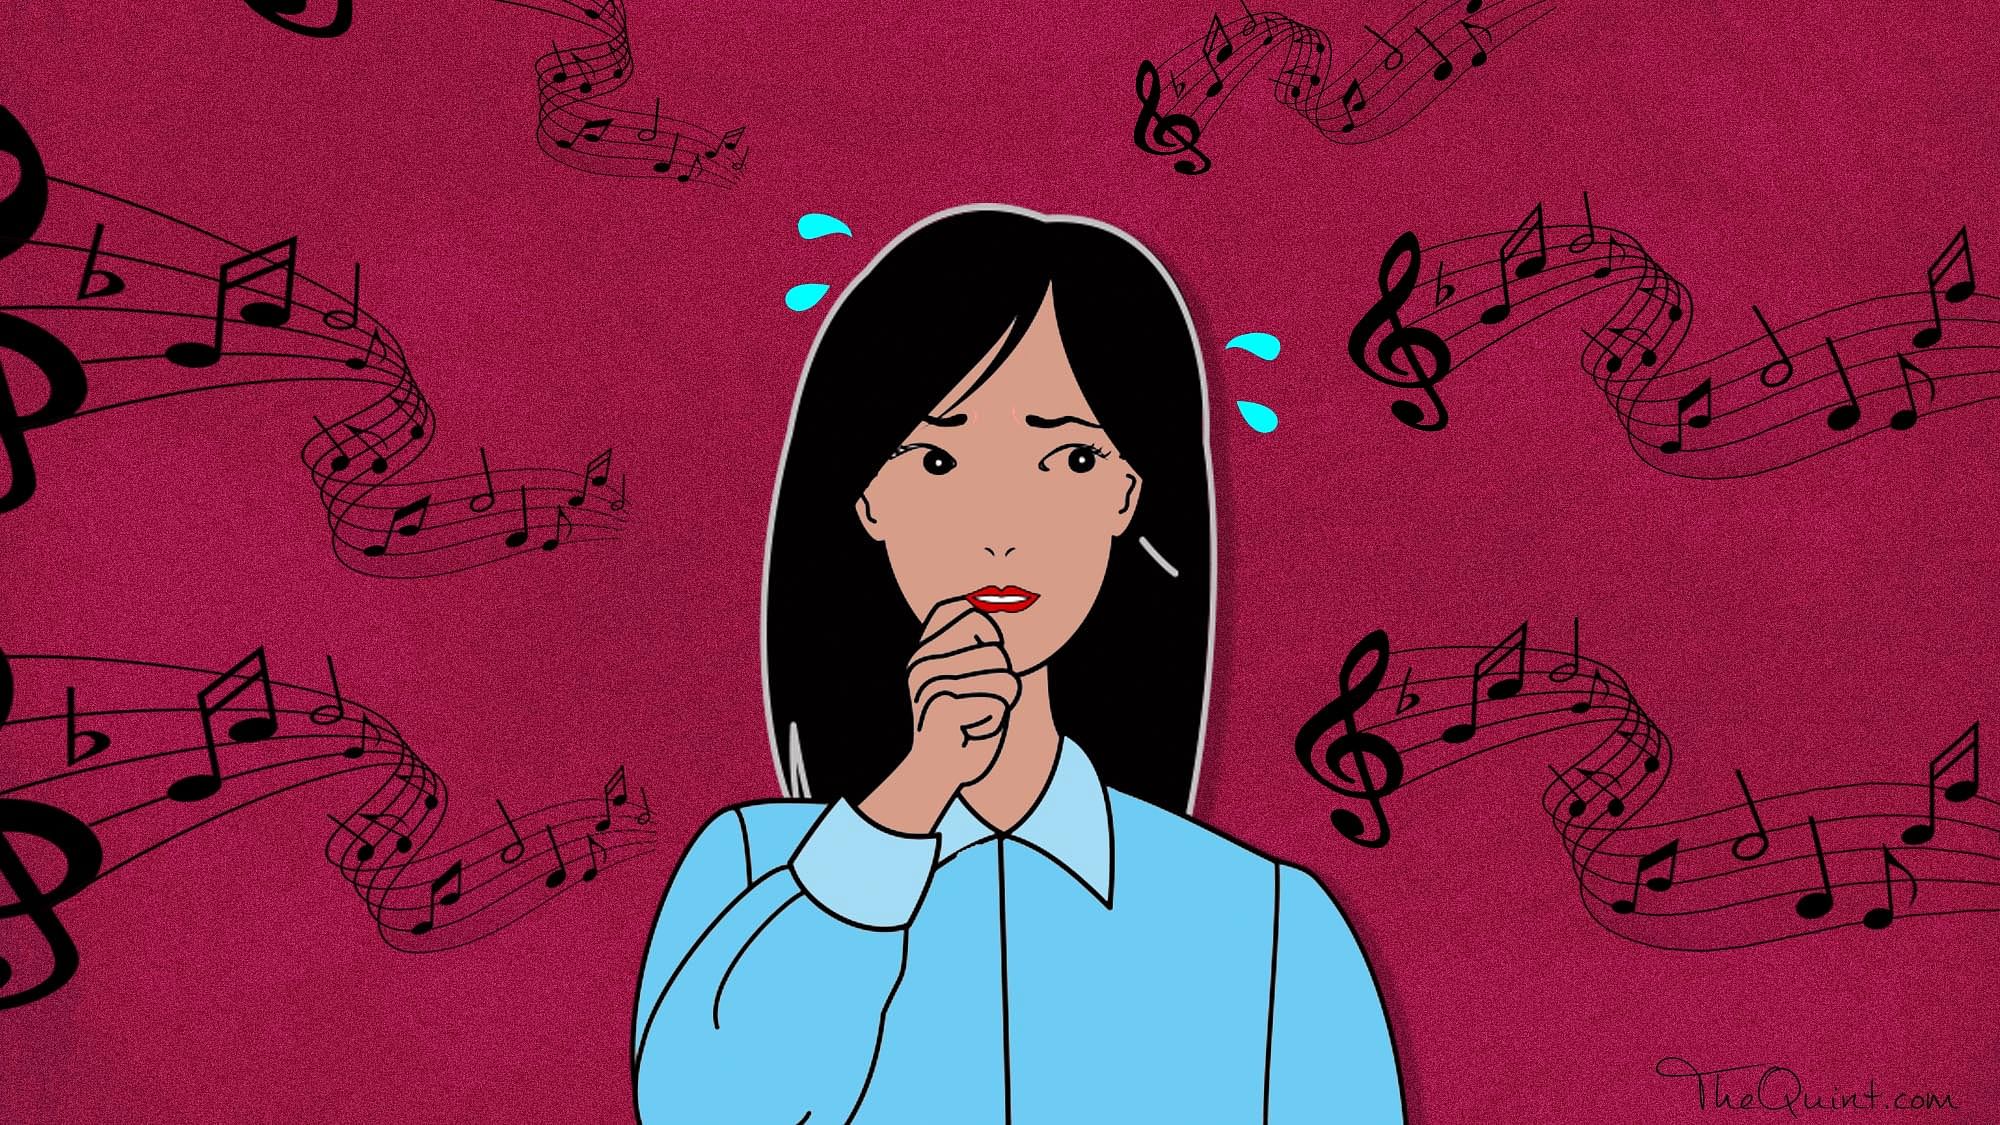 Popular music and street harassment have links that go far deeper than perceived.&nbsp;